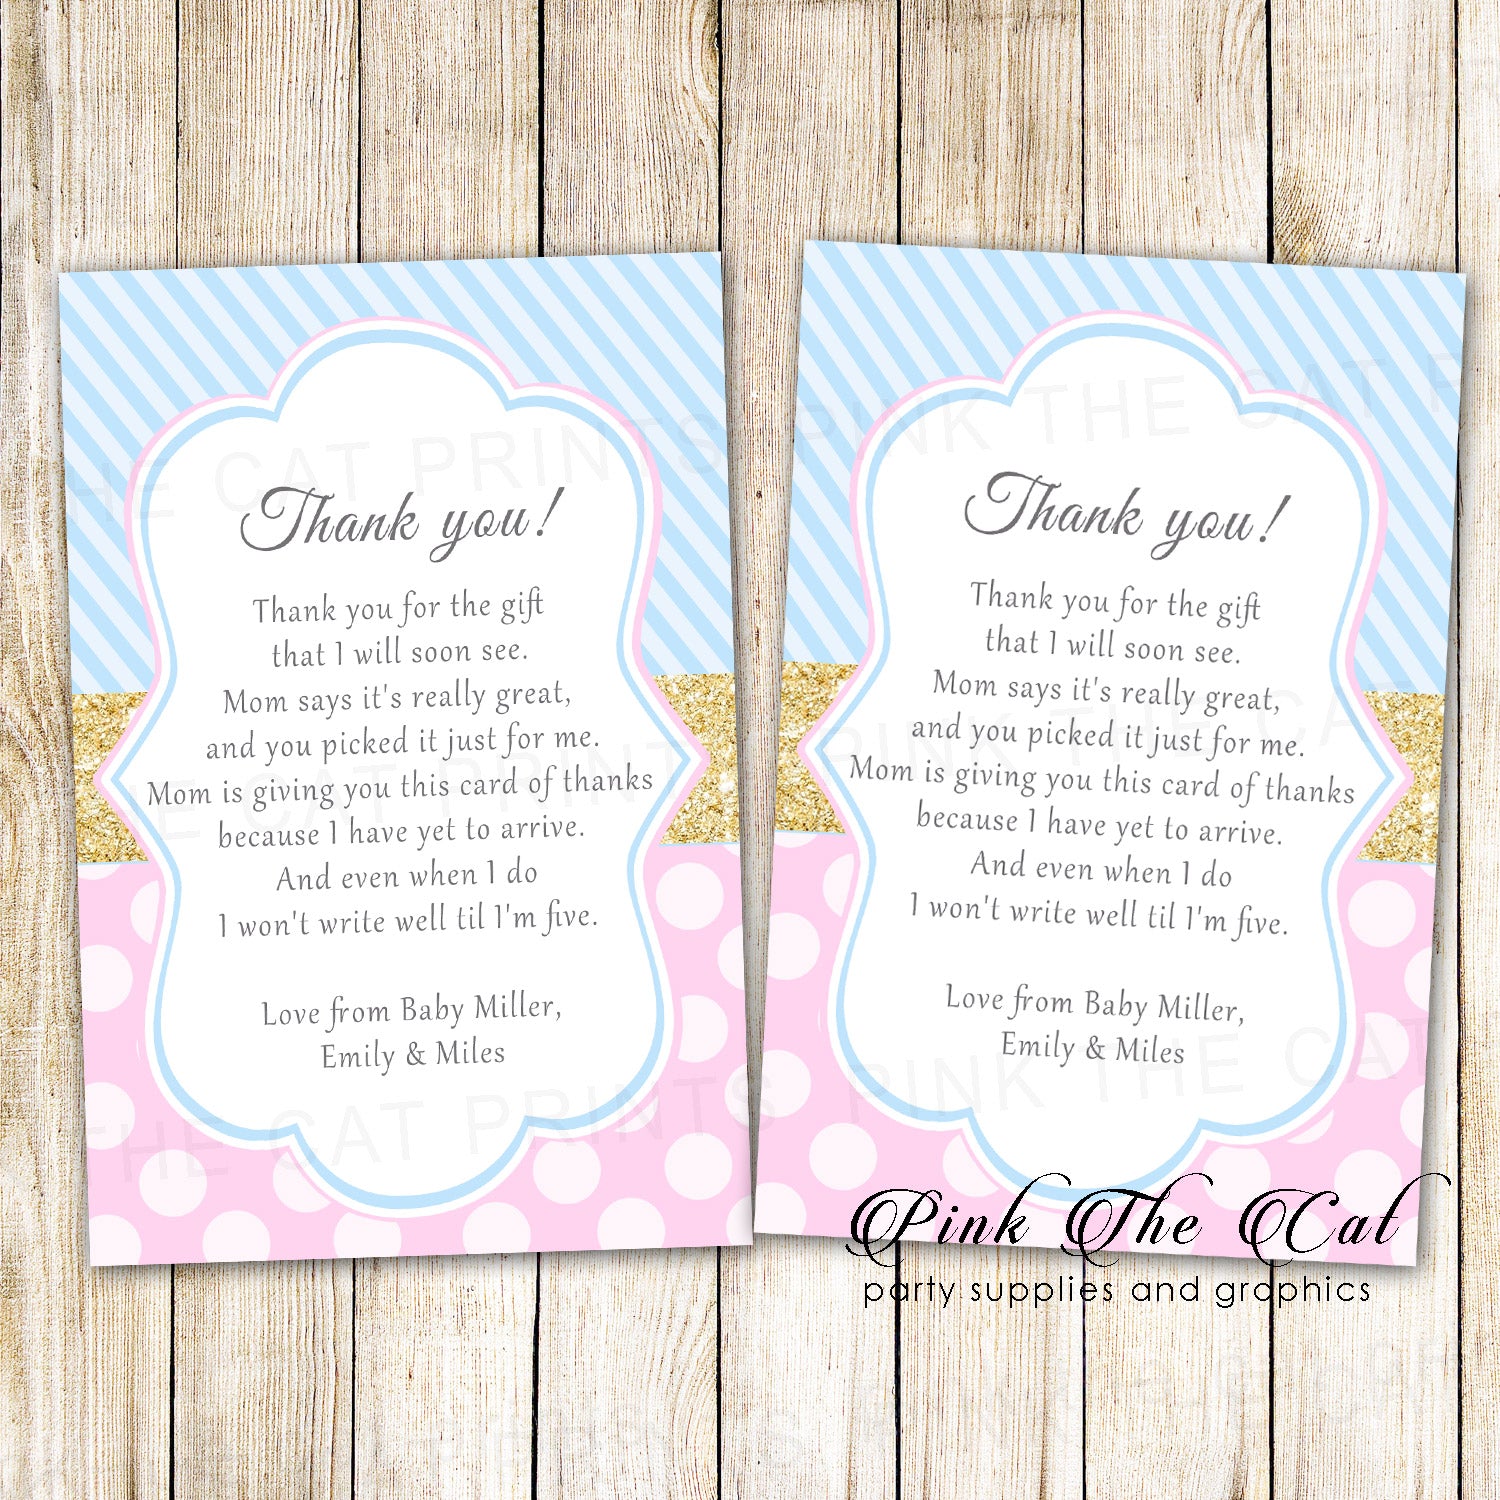 Star Thank You Card - Kids Birthday Party Notes Baby Boy Shower Blue G –  Pink the Cat